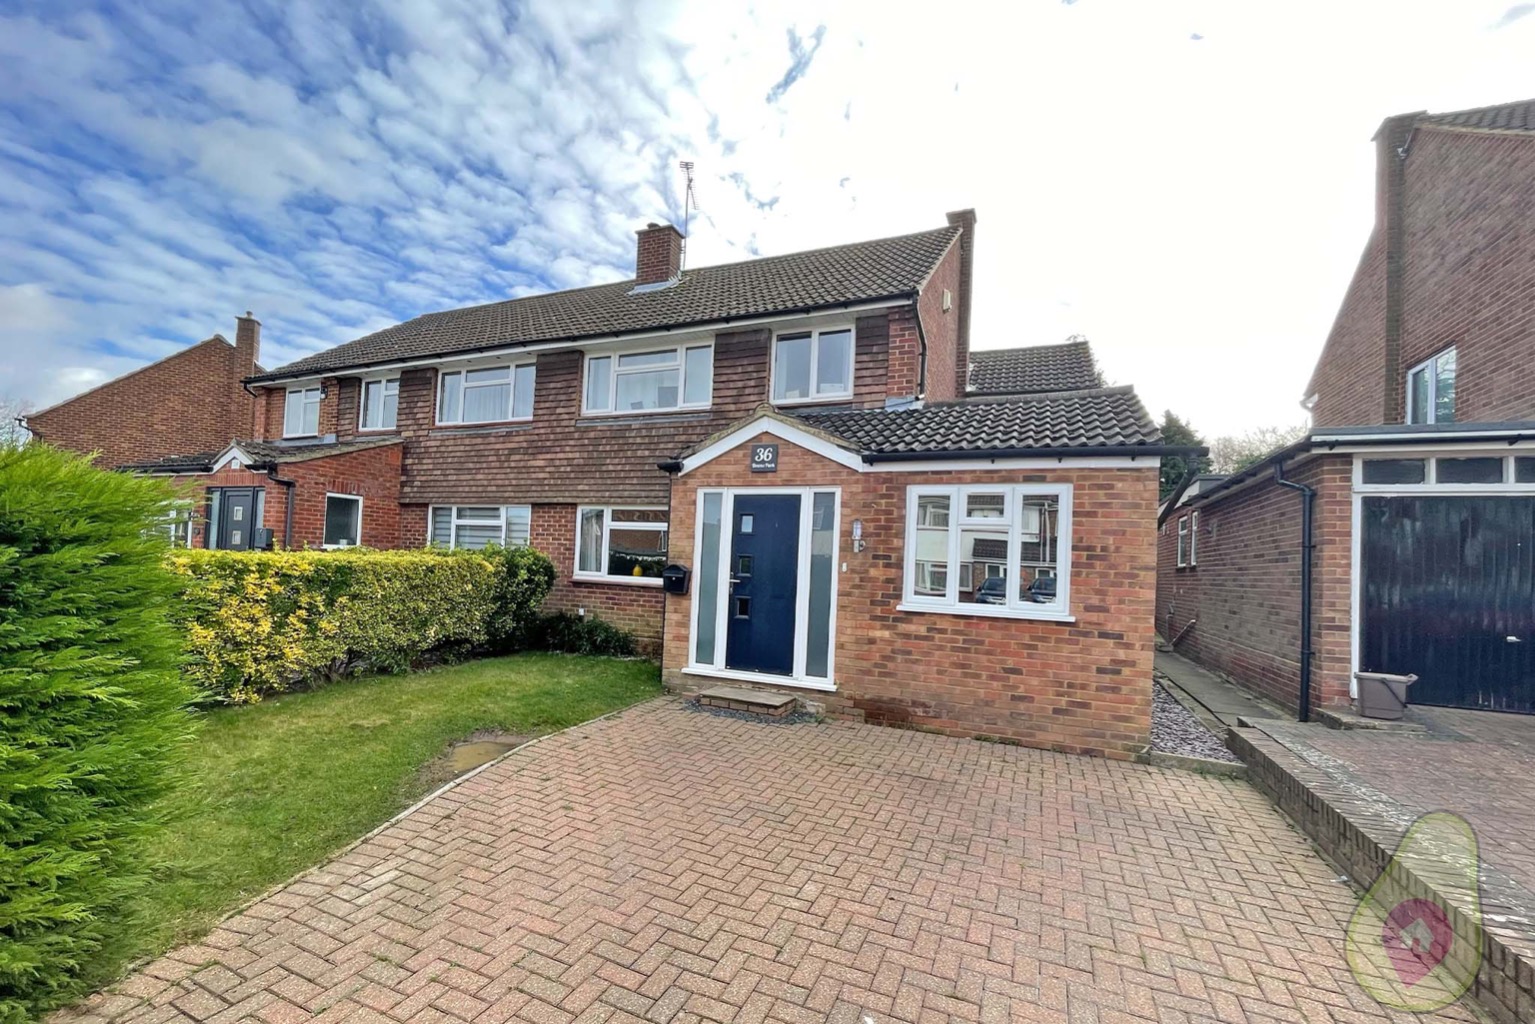 4 bed semi-detached house for sale in Downs Park, High Wycombe, HP13